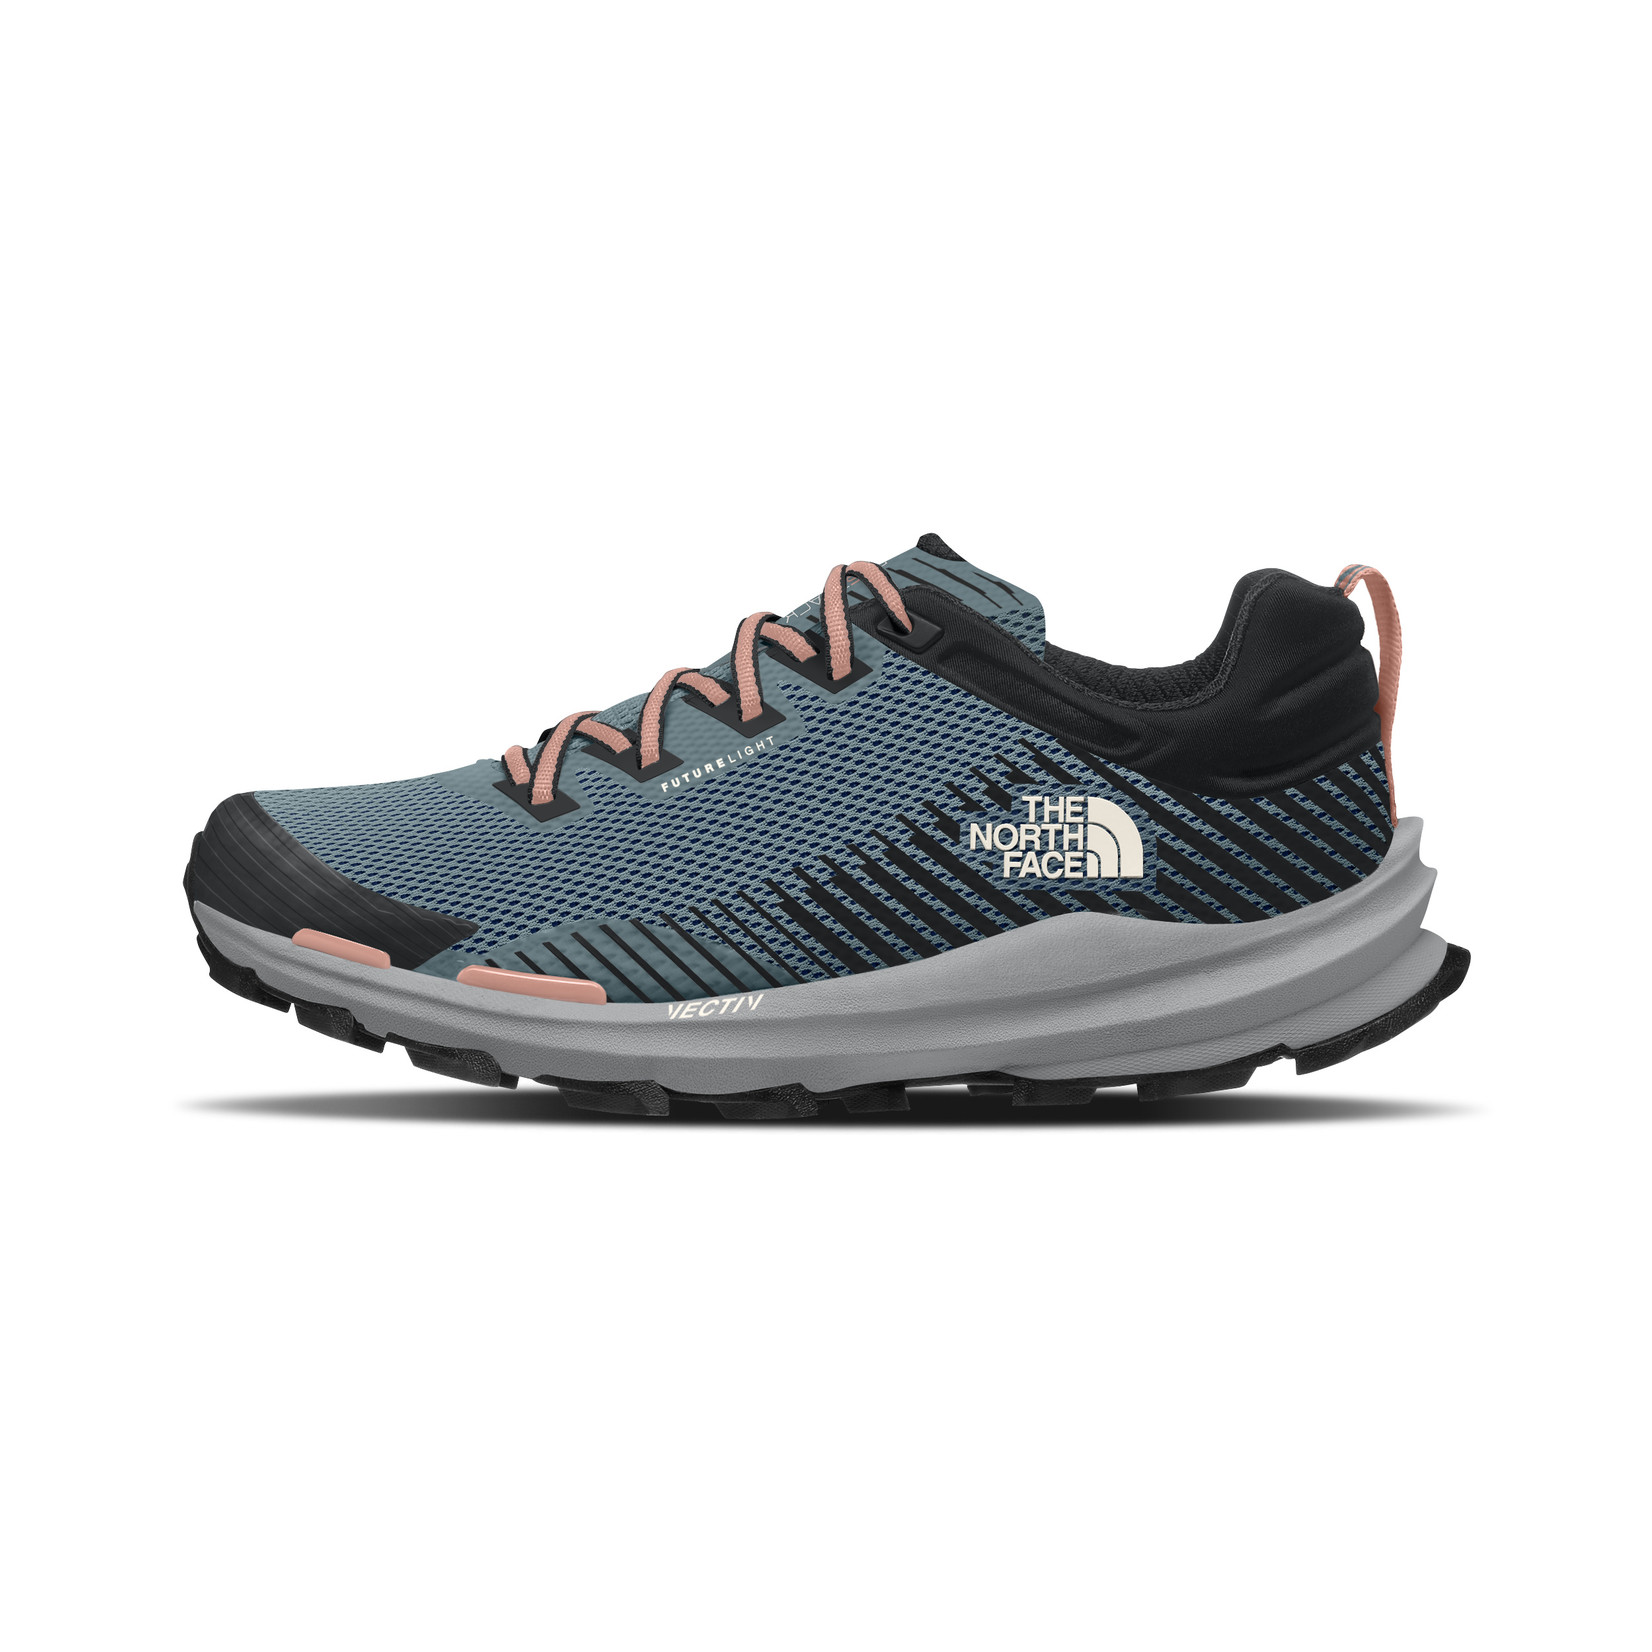 The North Face The North Face Women's Vectiv Fastpack Futurelight Hiking Shoes